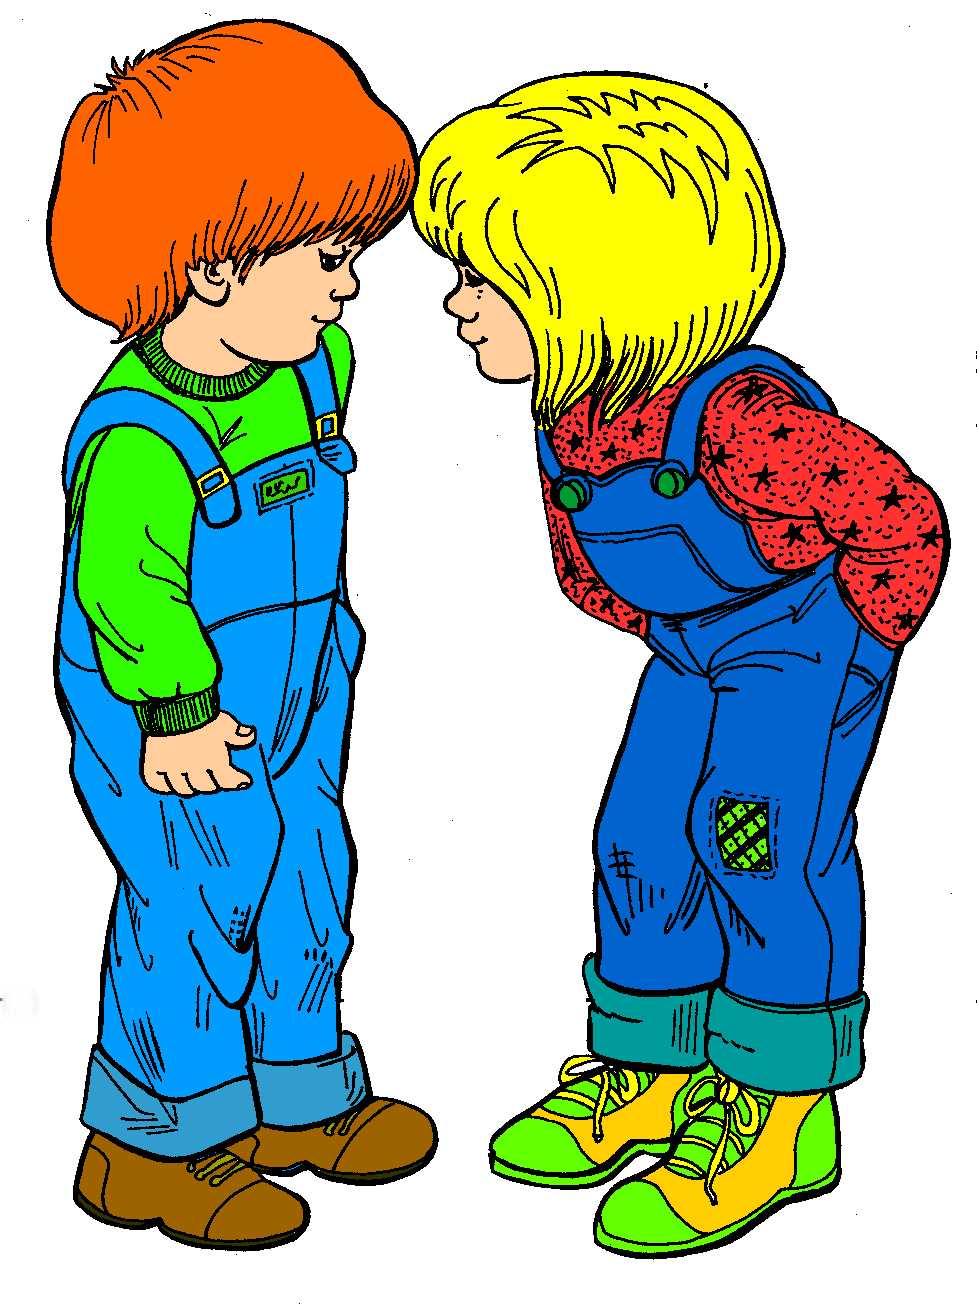 Caring clipart cartoon. Friendship images free download